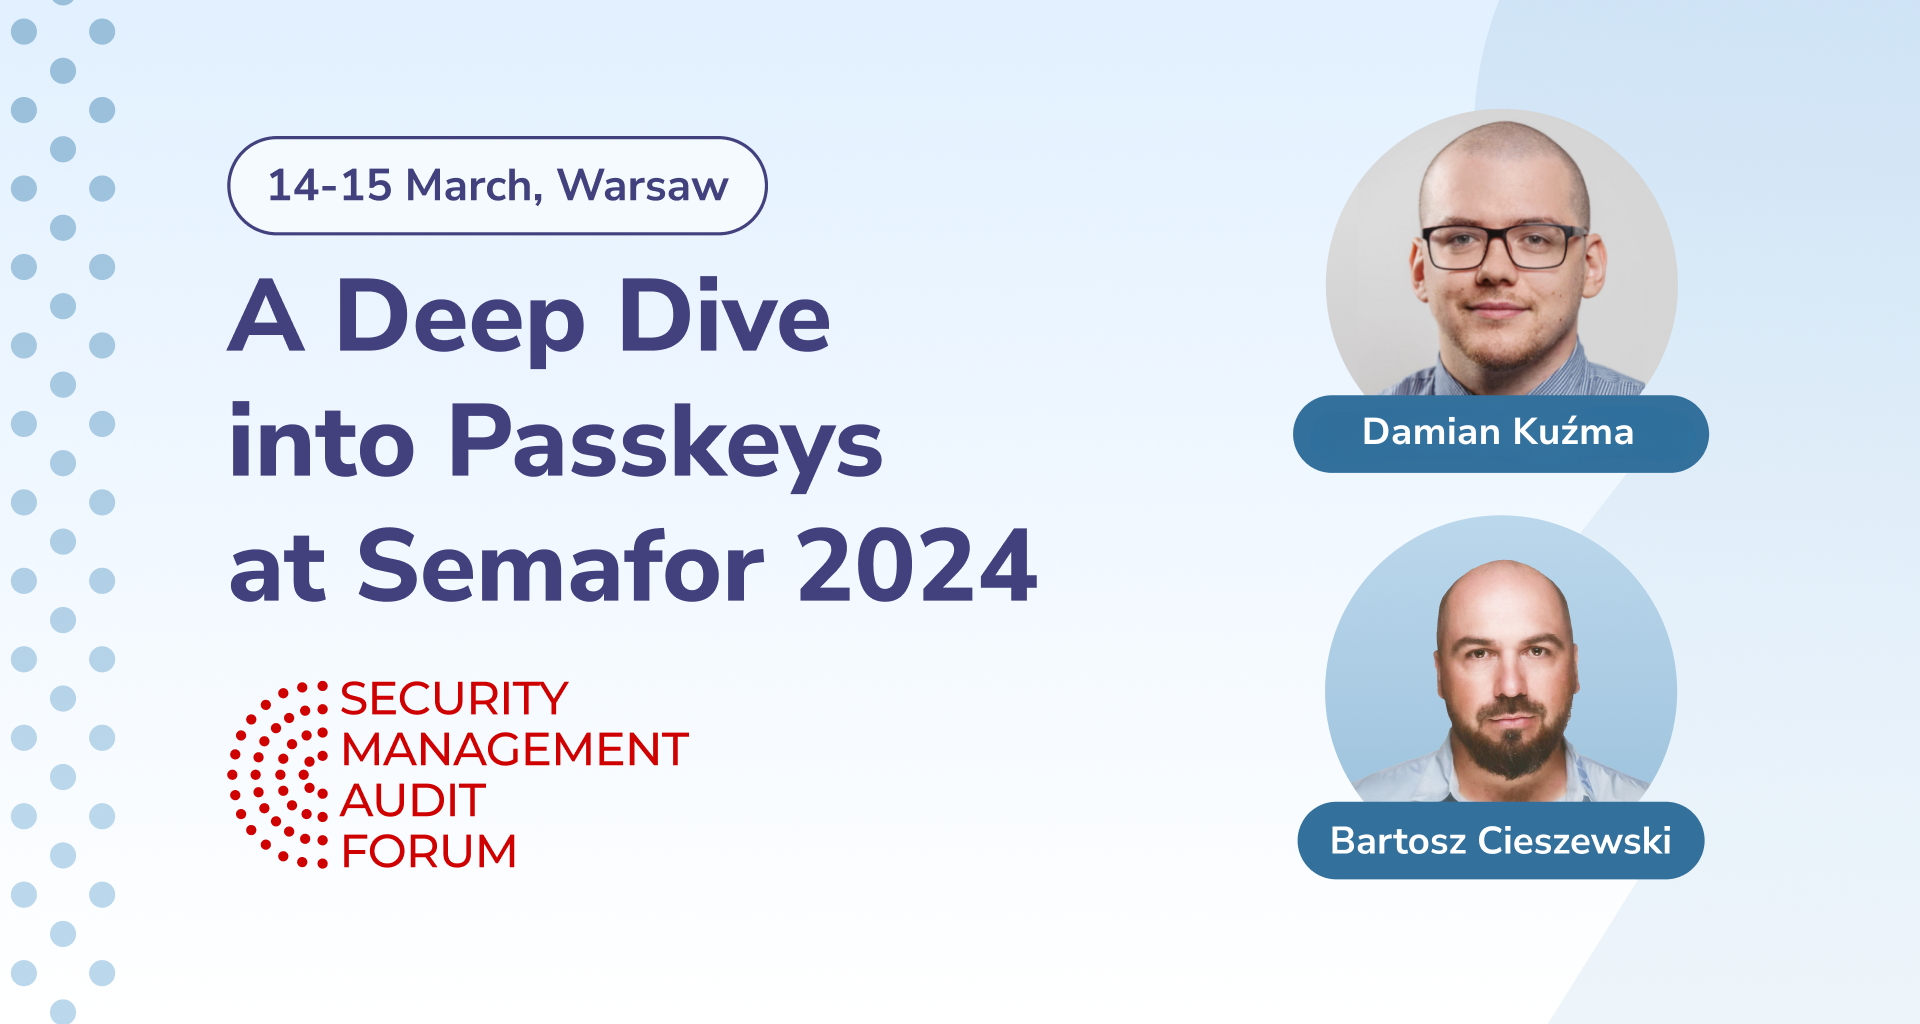 A Deep Dive into Passkeys at Semafor 2024